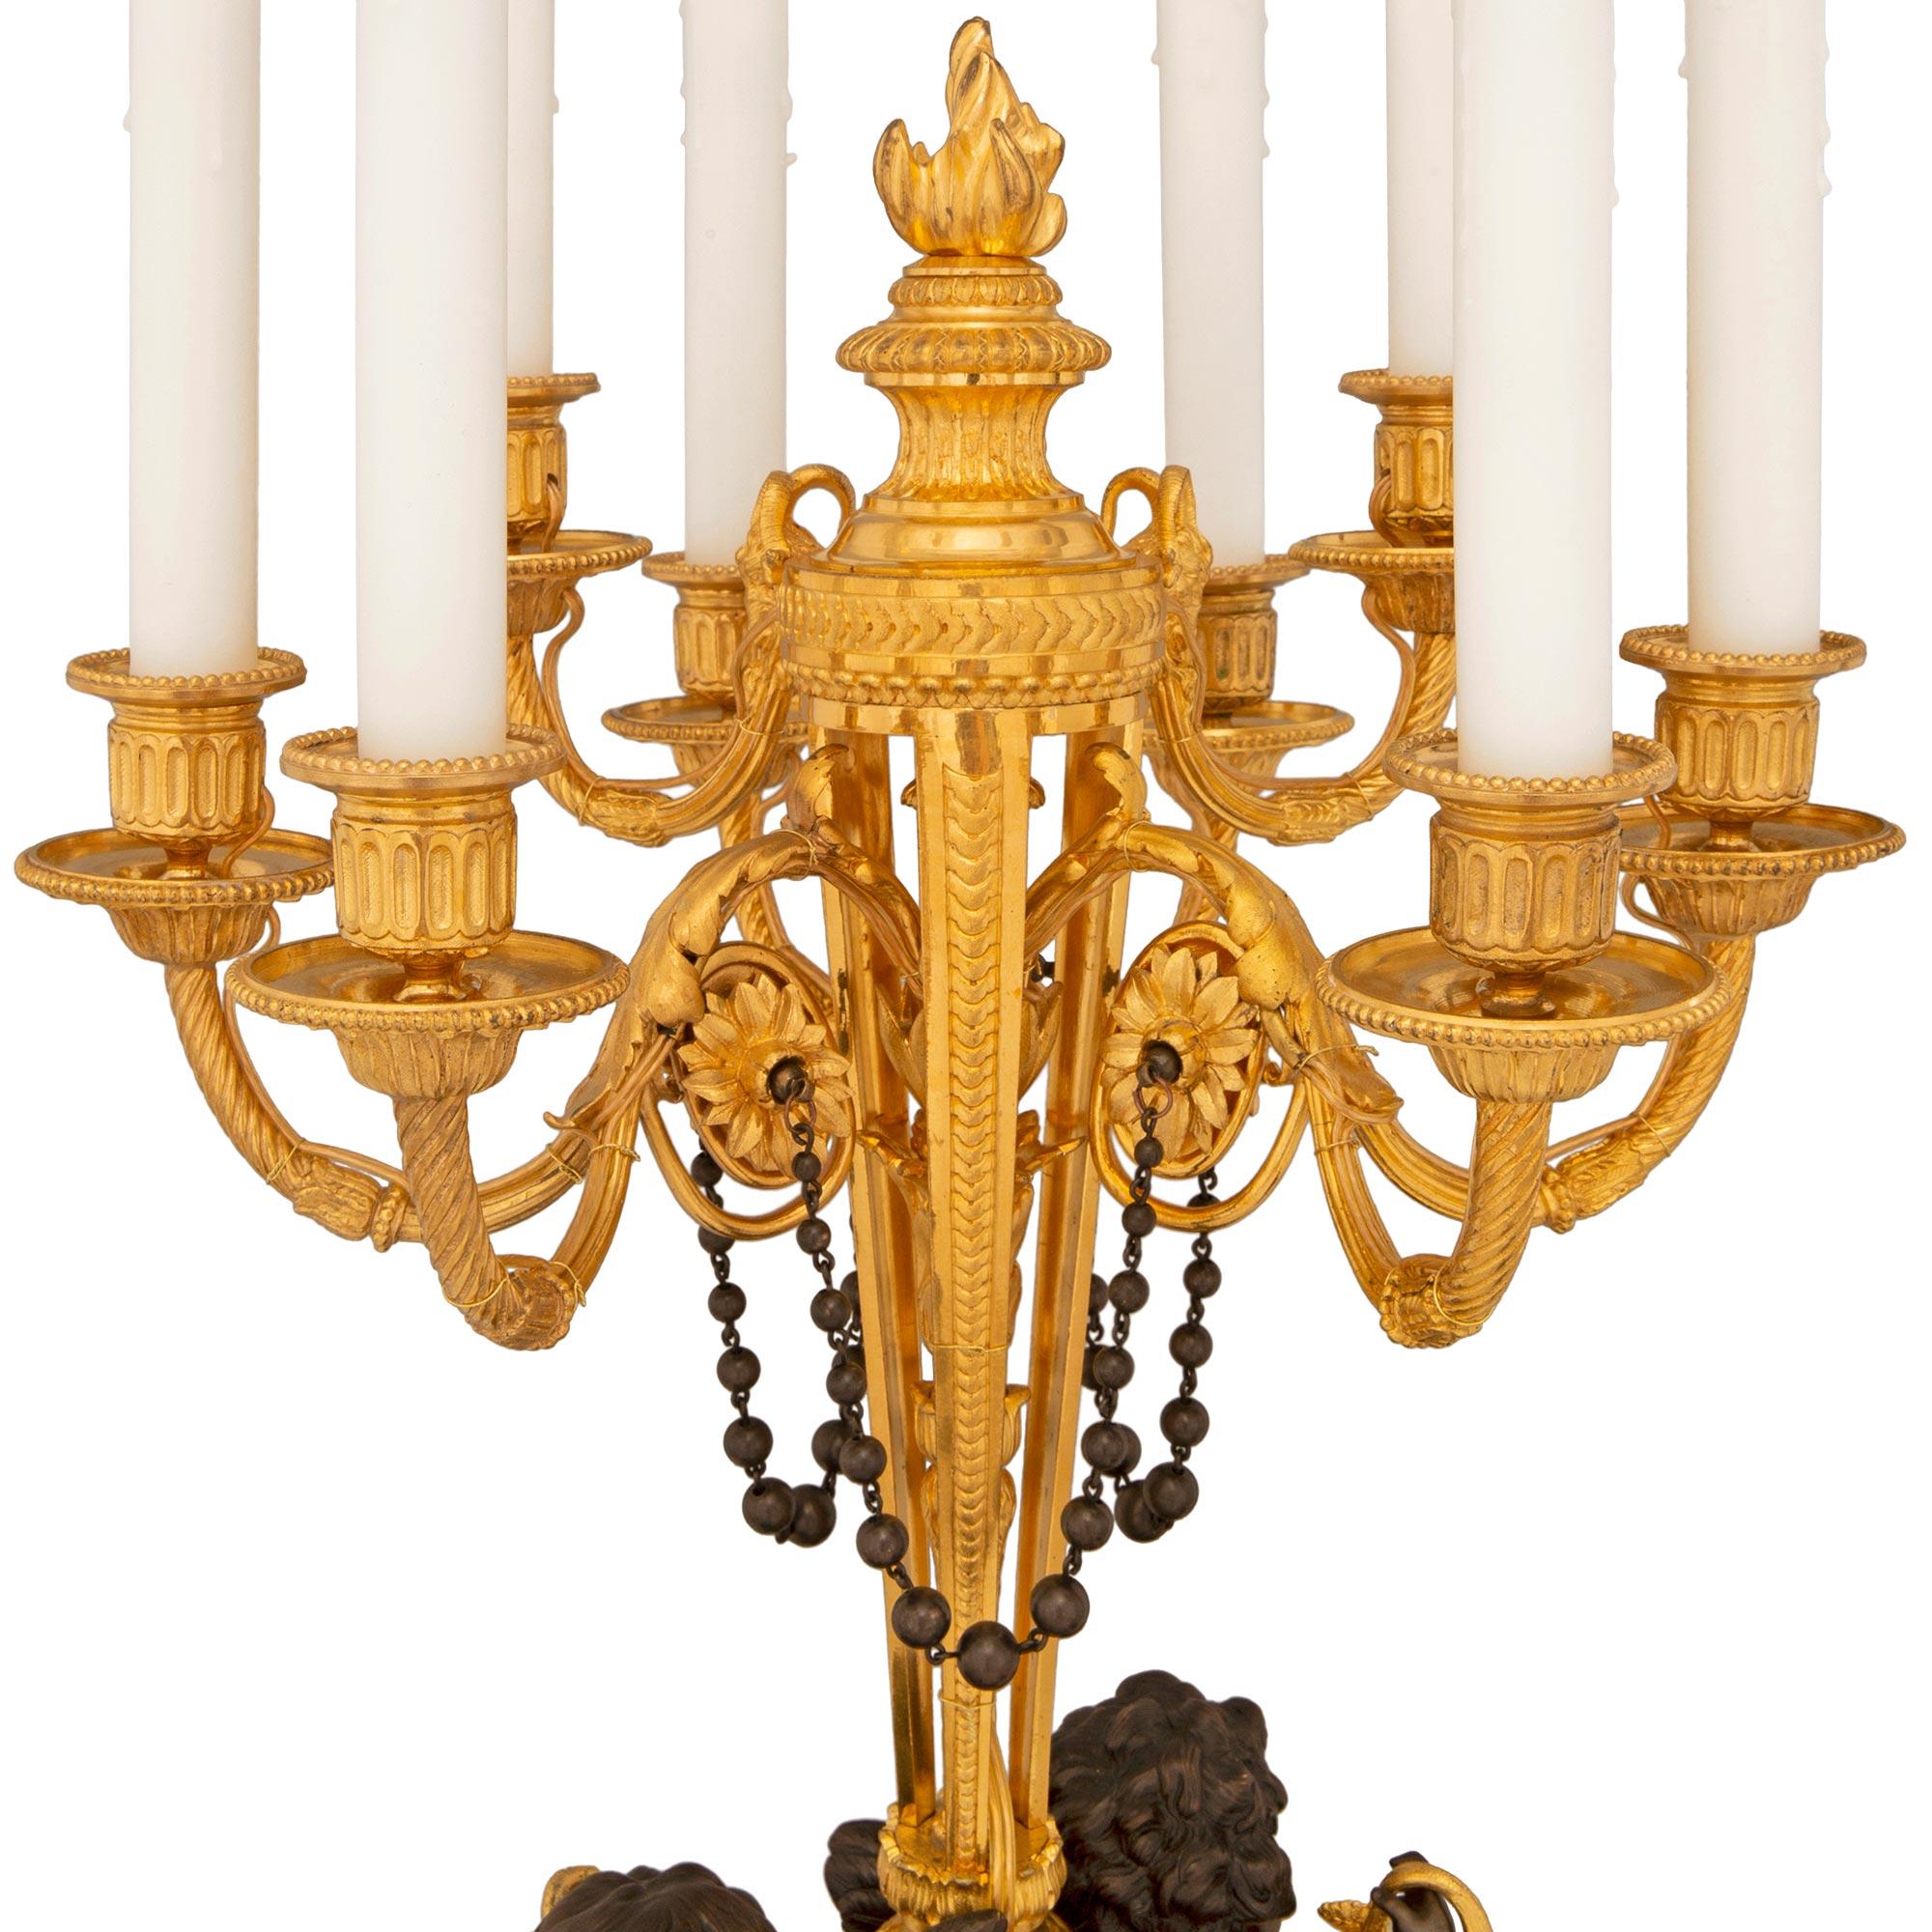 Bronze True Pair of French 19th Century Belle Époque Period Ormolu Candelabra Lamps For Sale